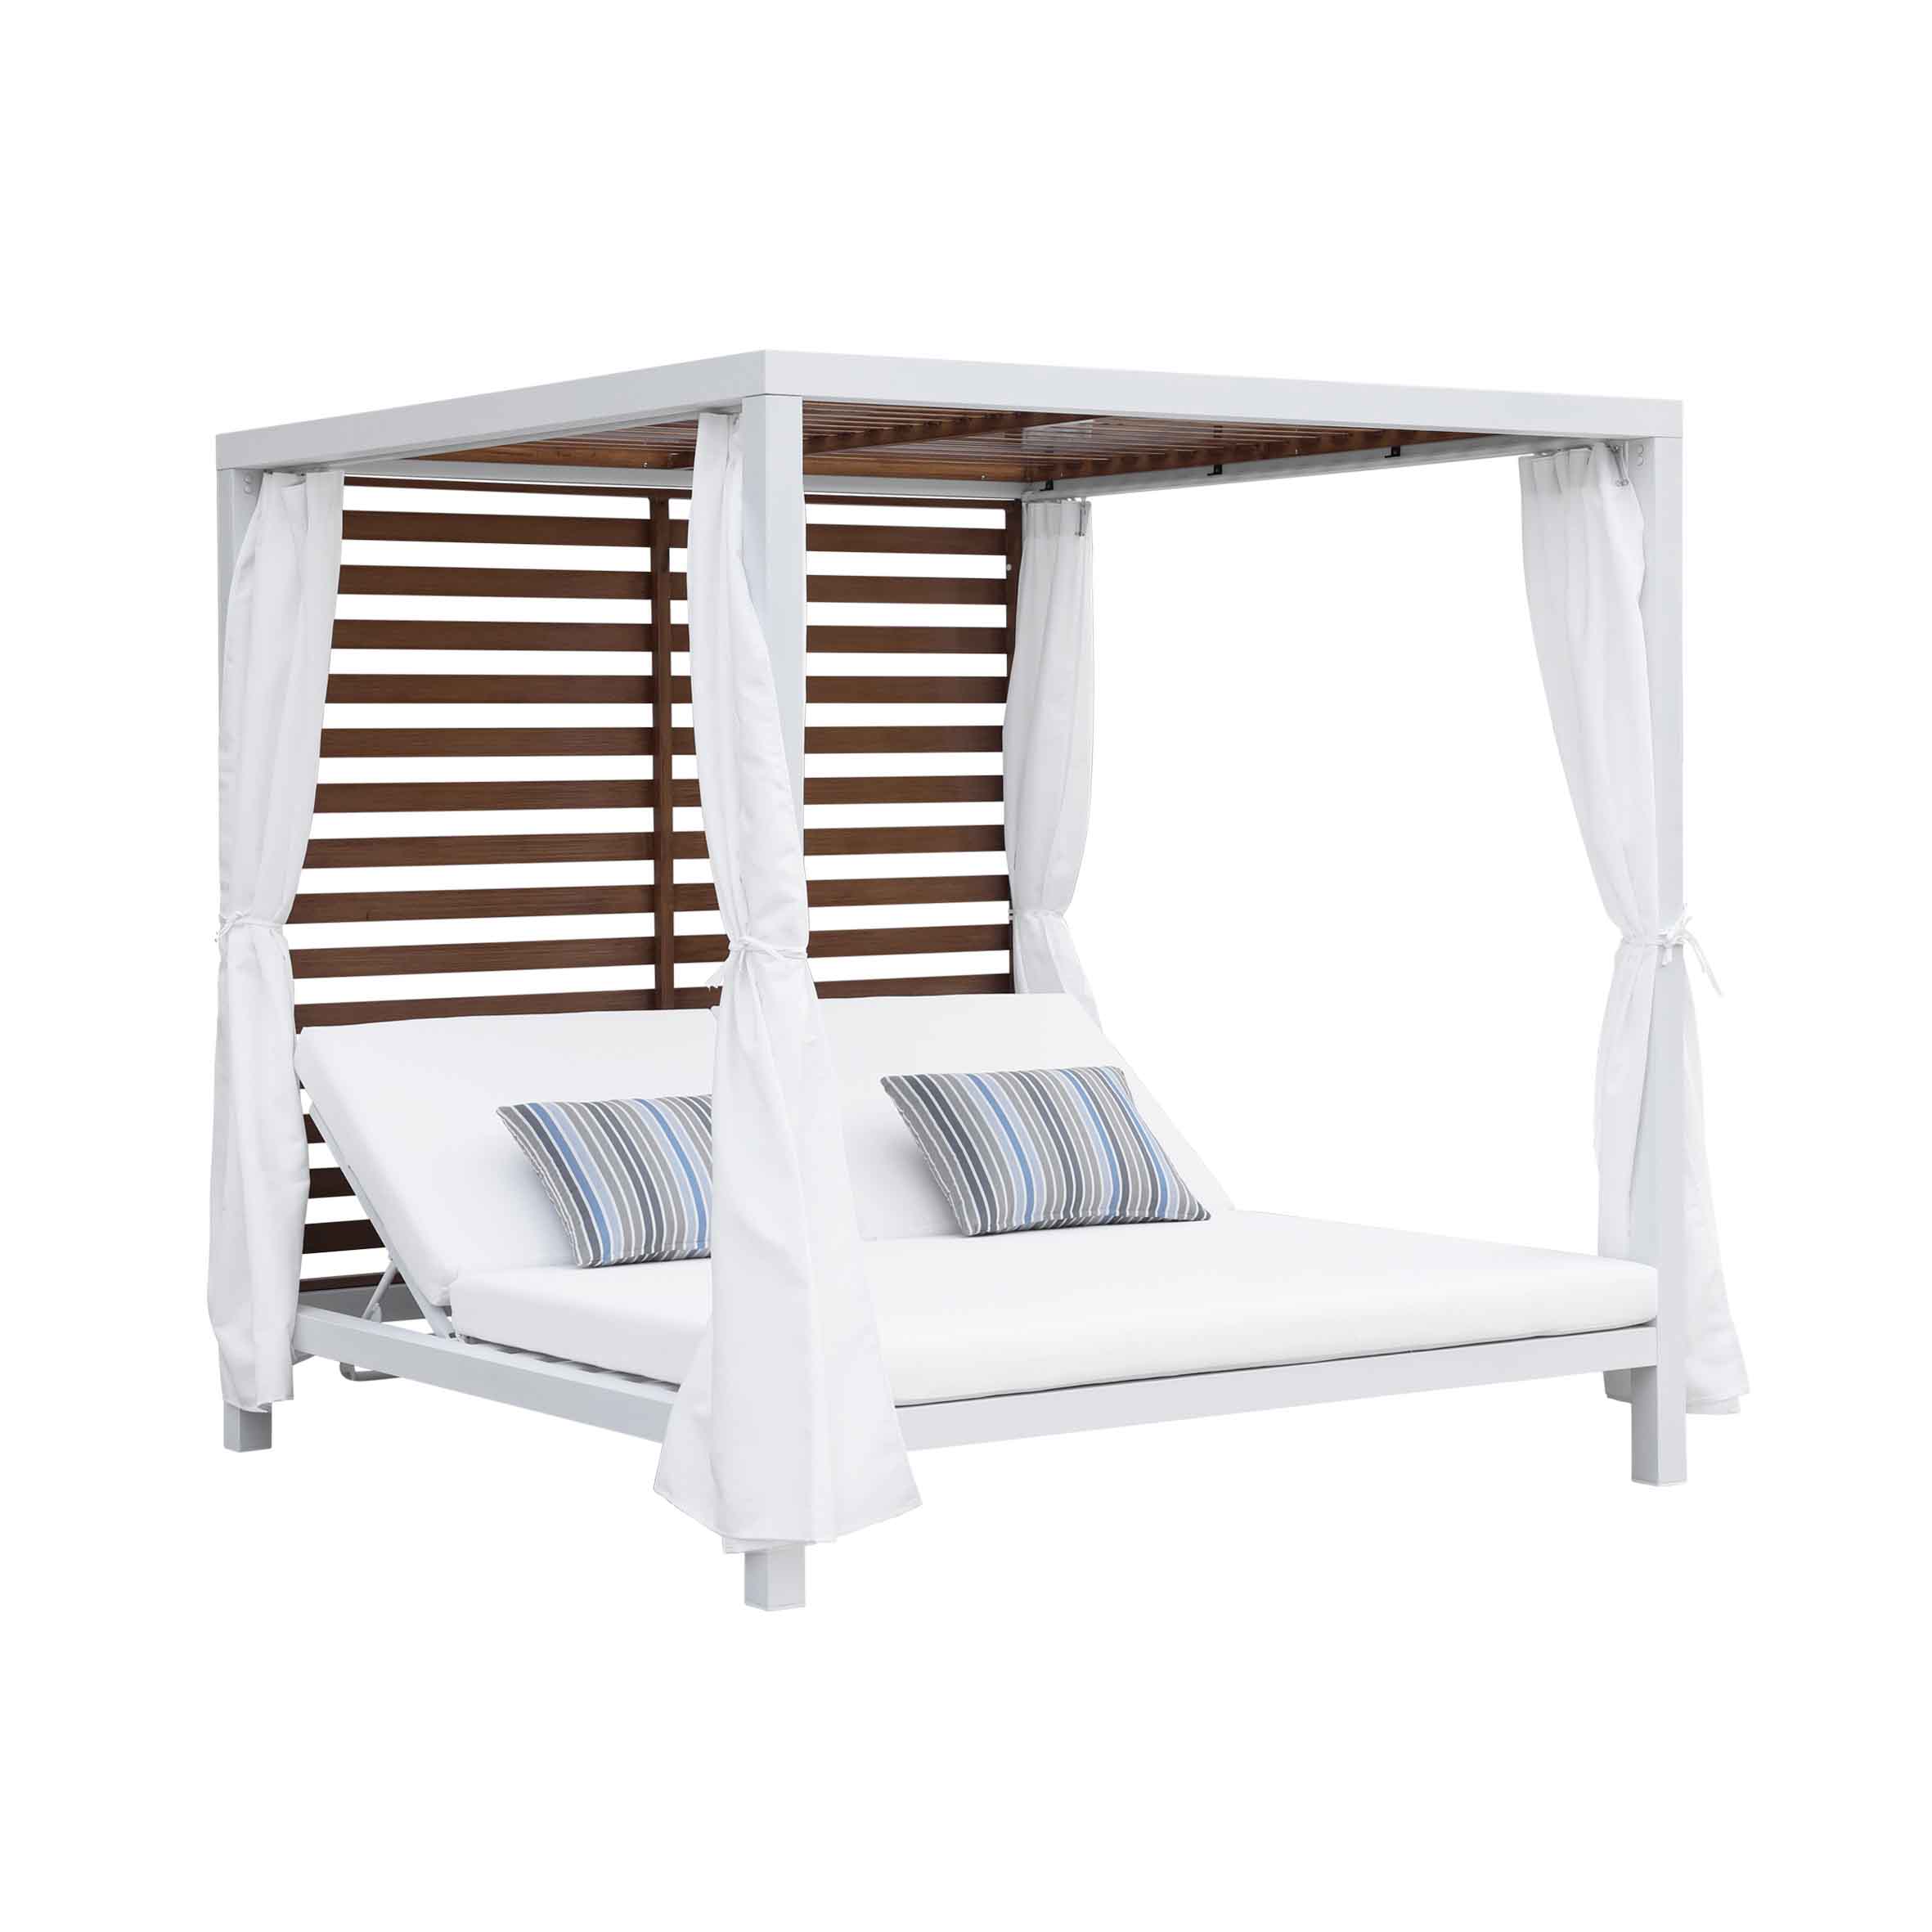 April alu. daybed with panel